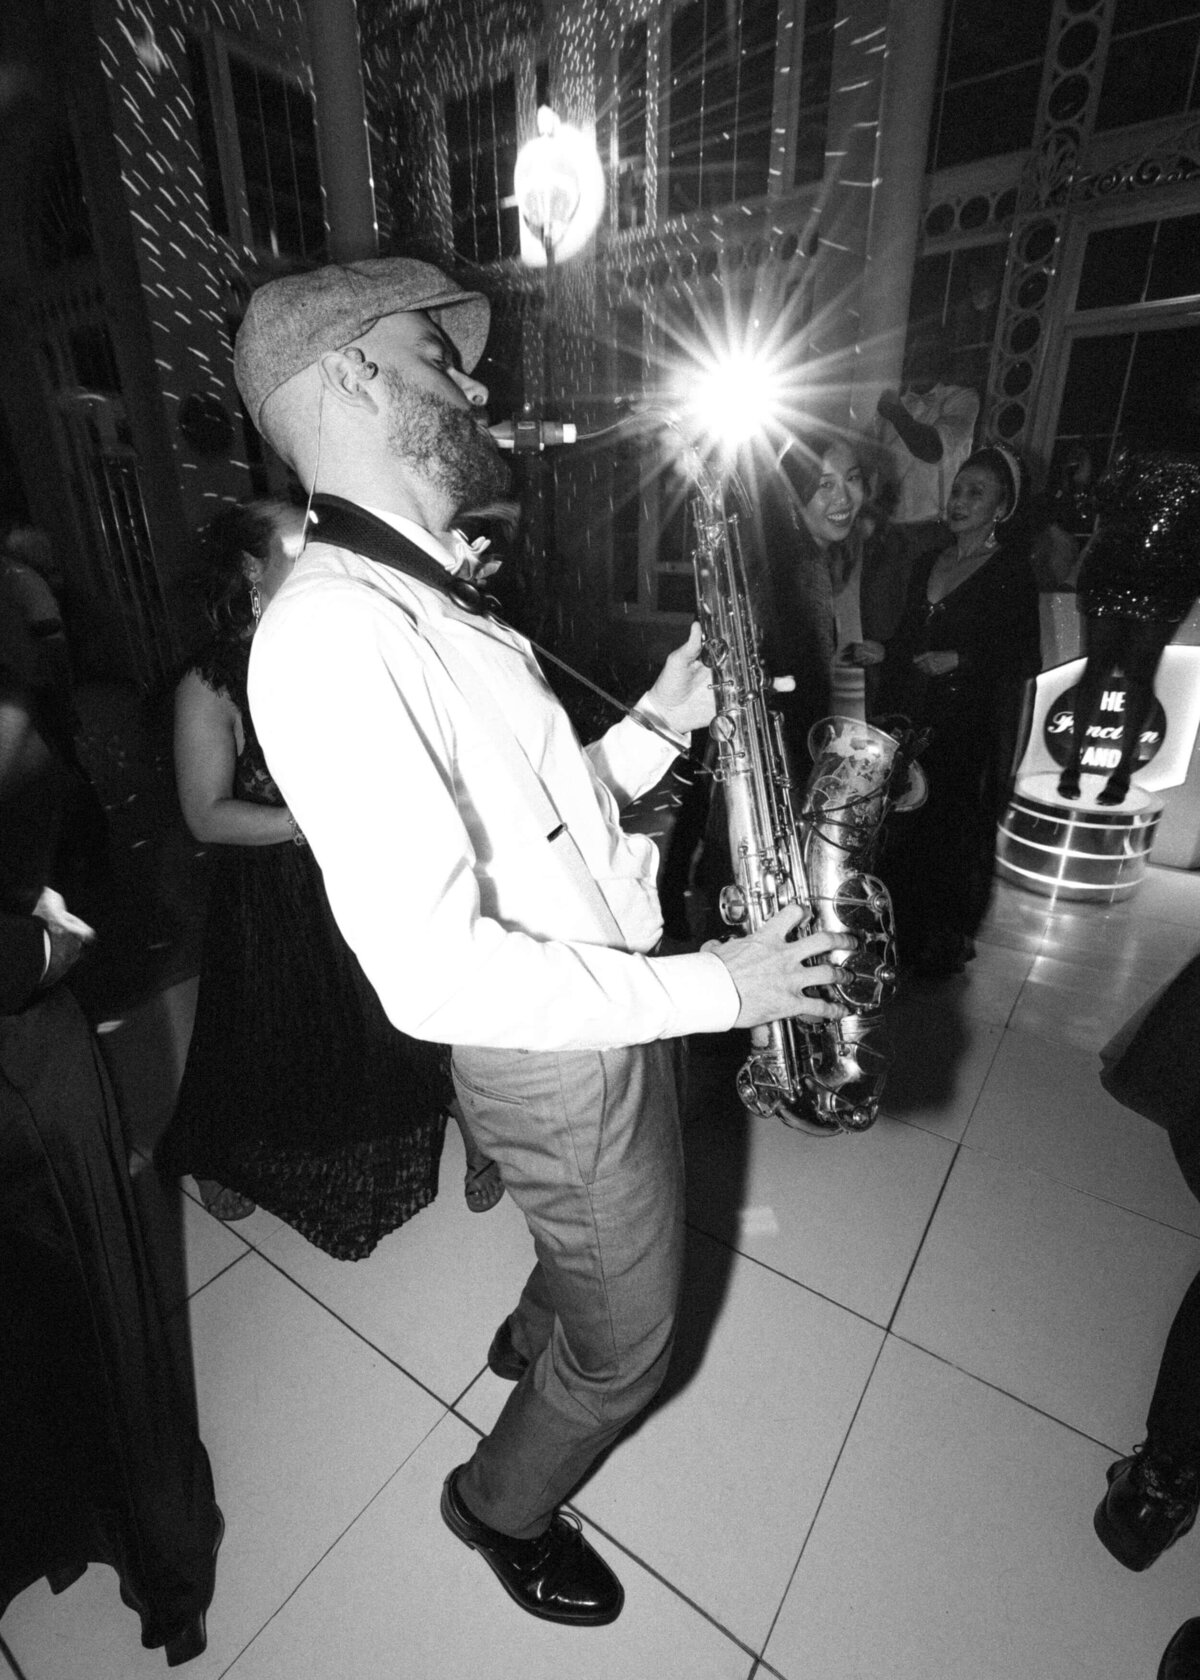 chloe-winstanley-weddings-syon-park-conservatory-saxophone-function-band